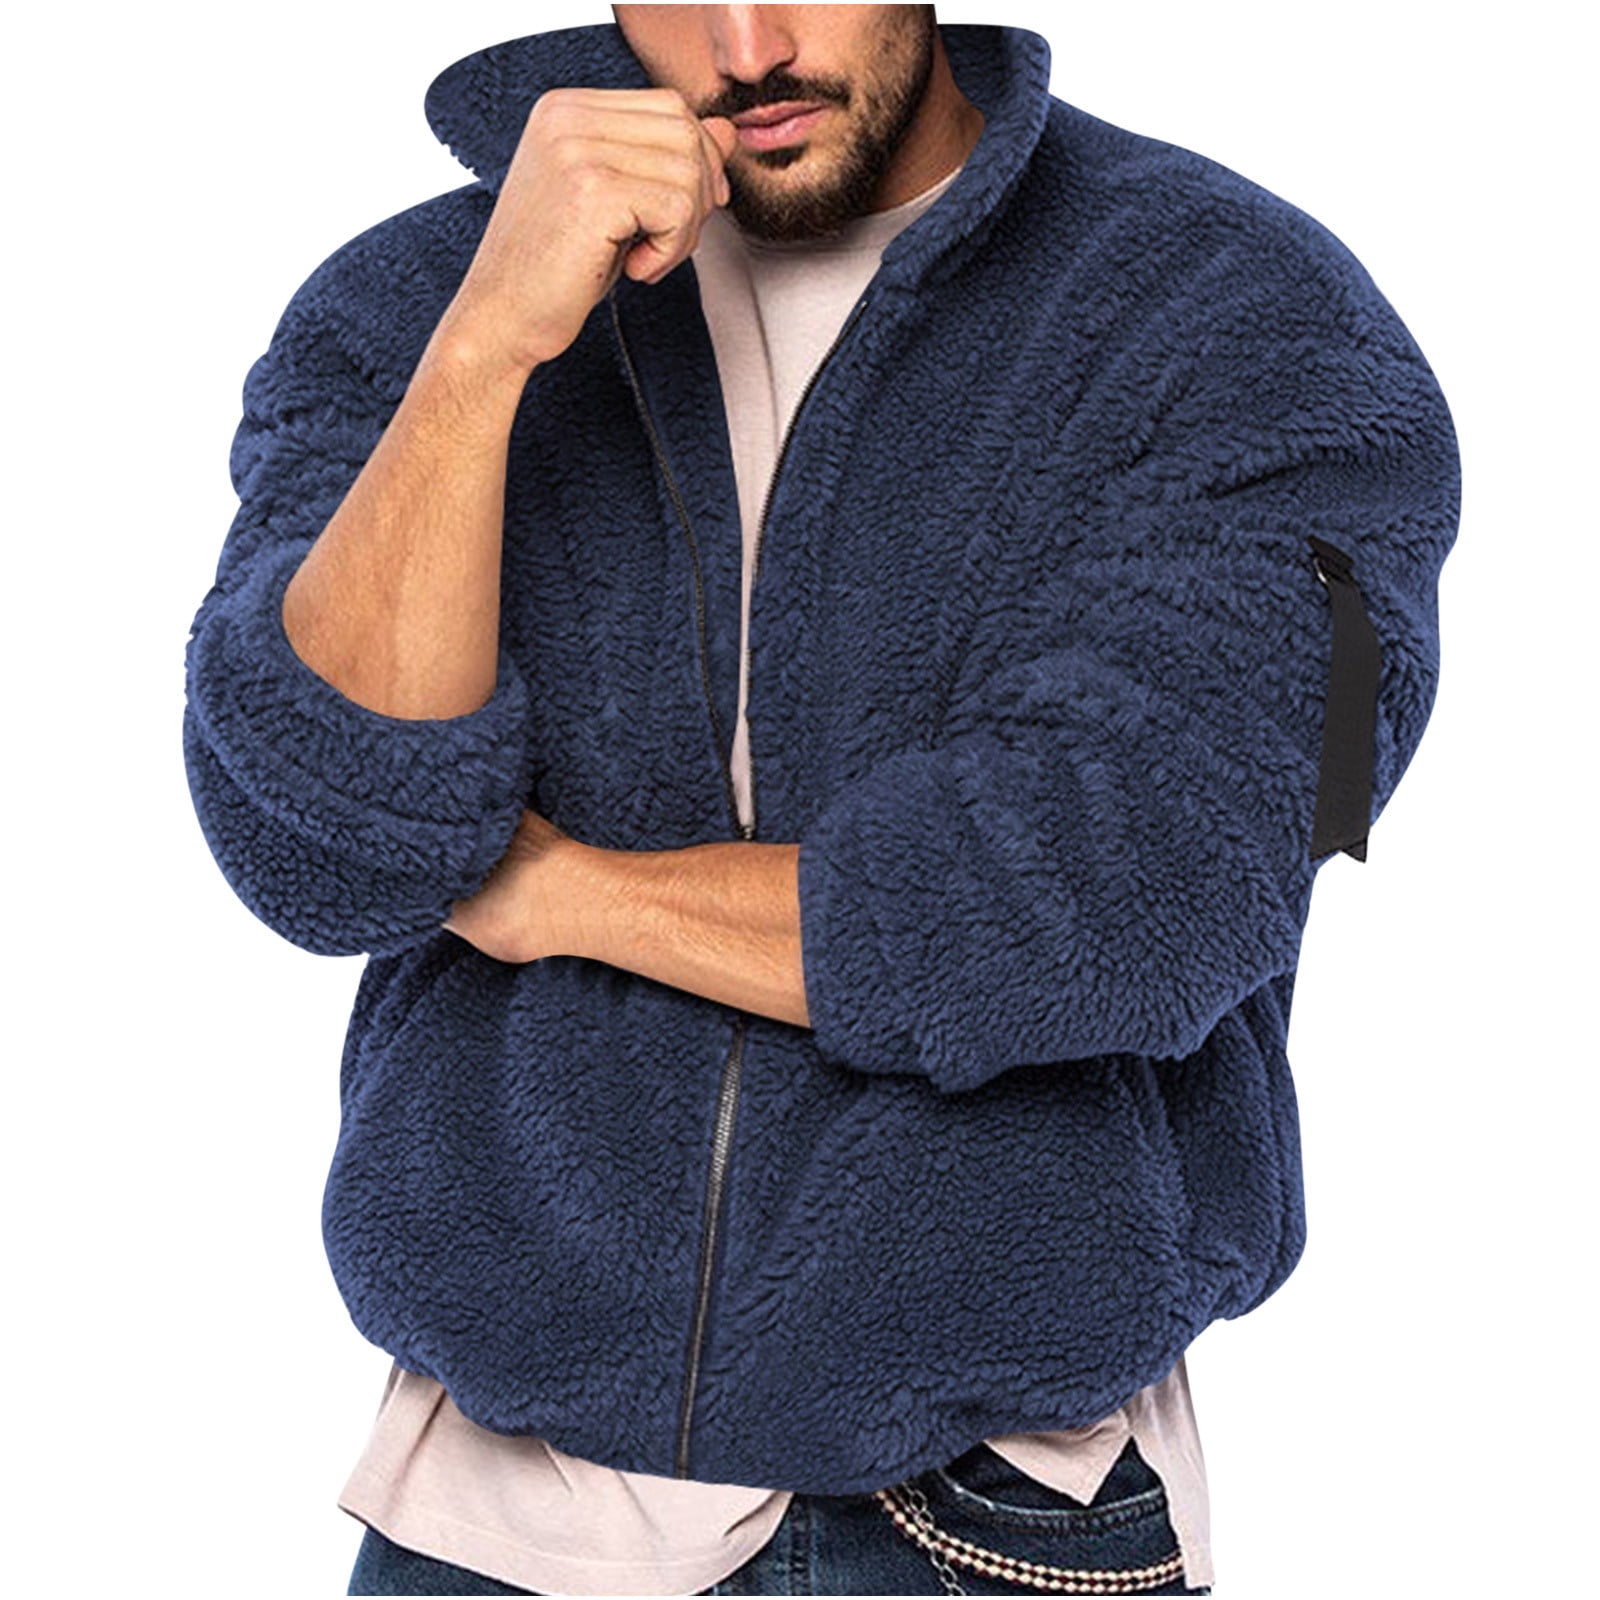 JSGEK Fluffy Fuzzy Sherpa Long Sleeve Hoodies with Pocket Casual